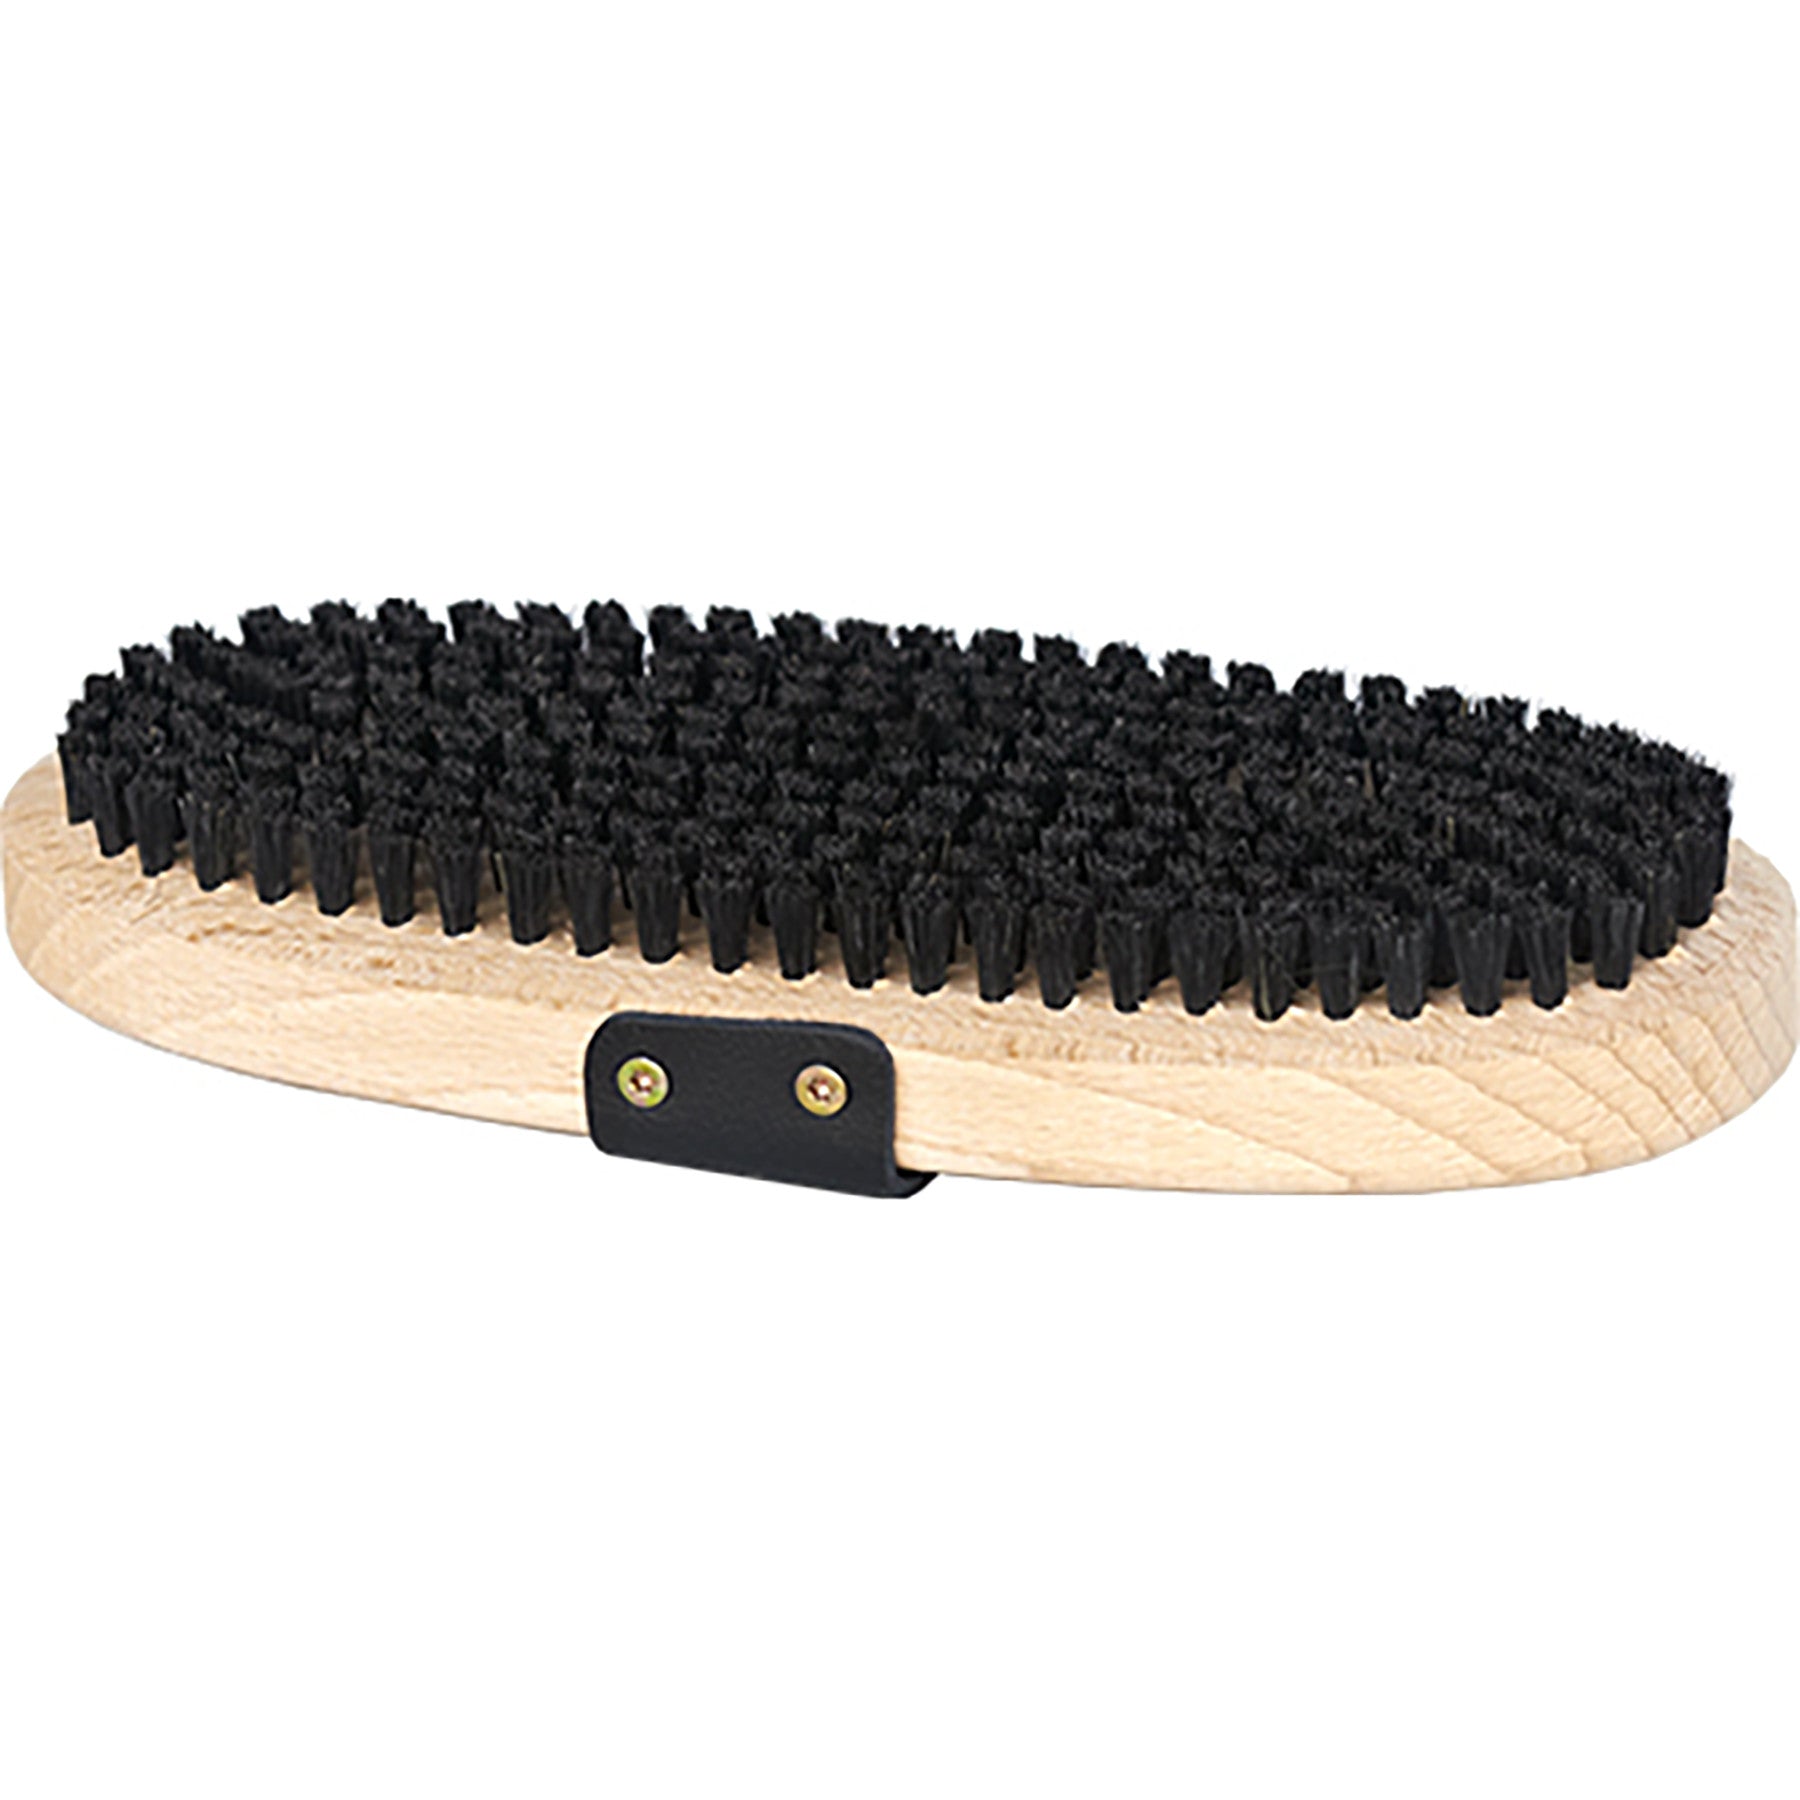 Rode Oval Horsehair Brush  Boulder Nordic & Cycle Sport